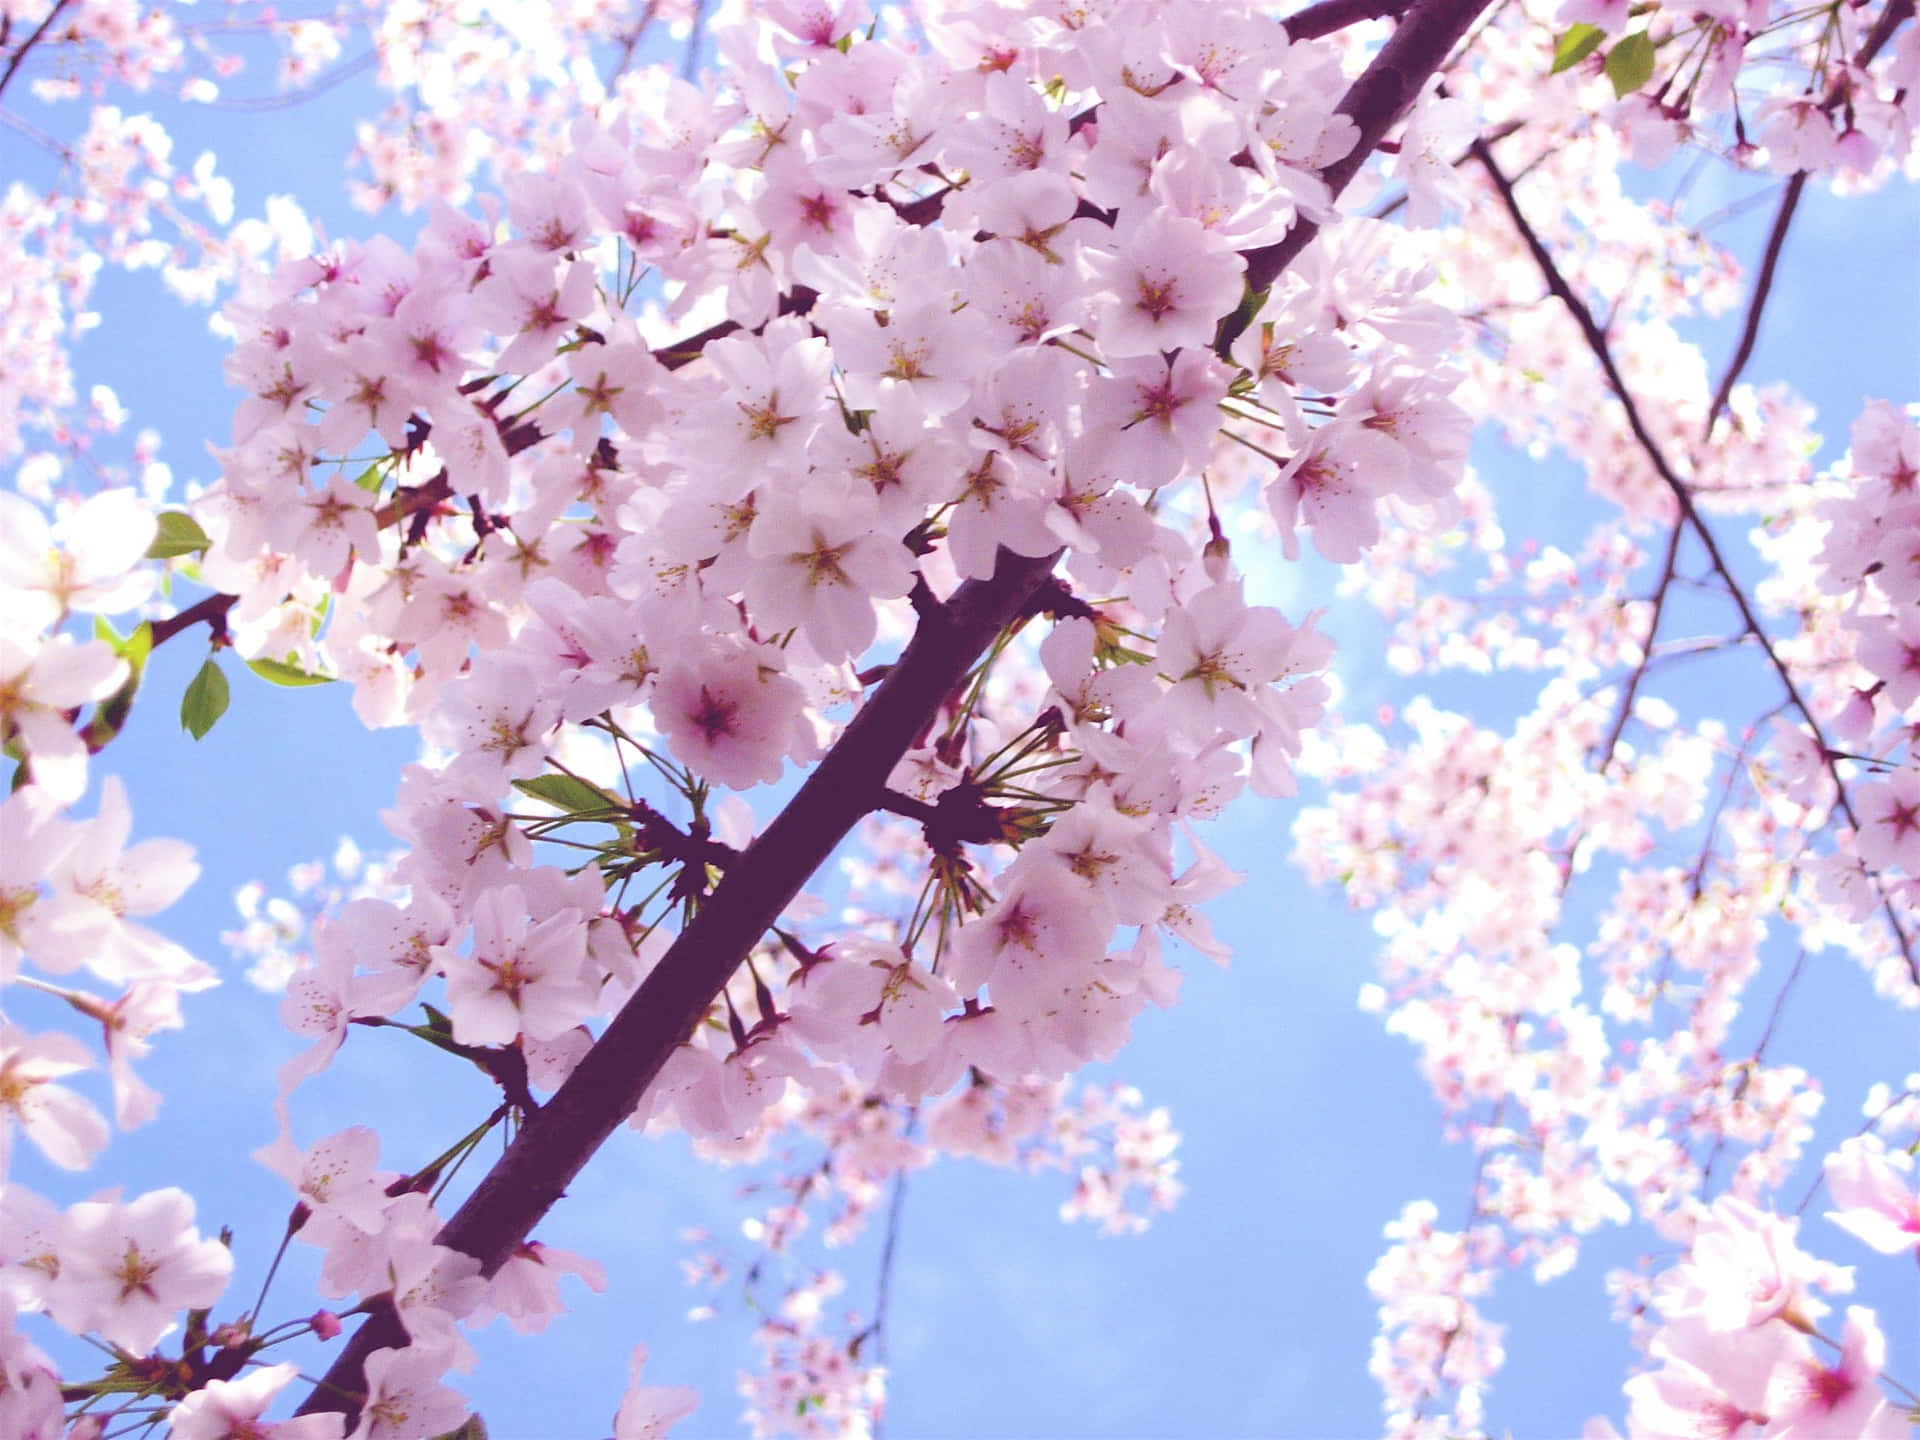 A pink-hued Cherry Blossom Tree stands tall against a bright blue sky Wallpaper